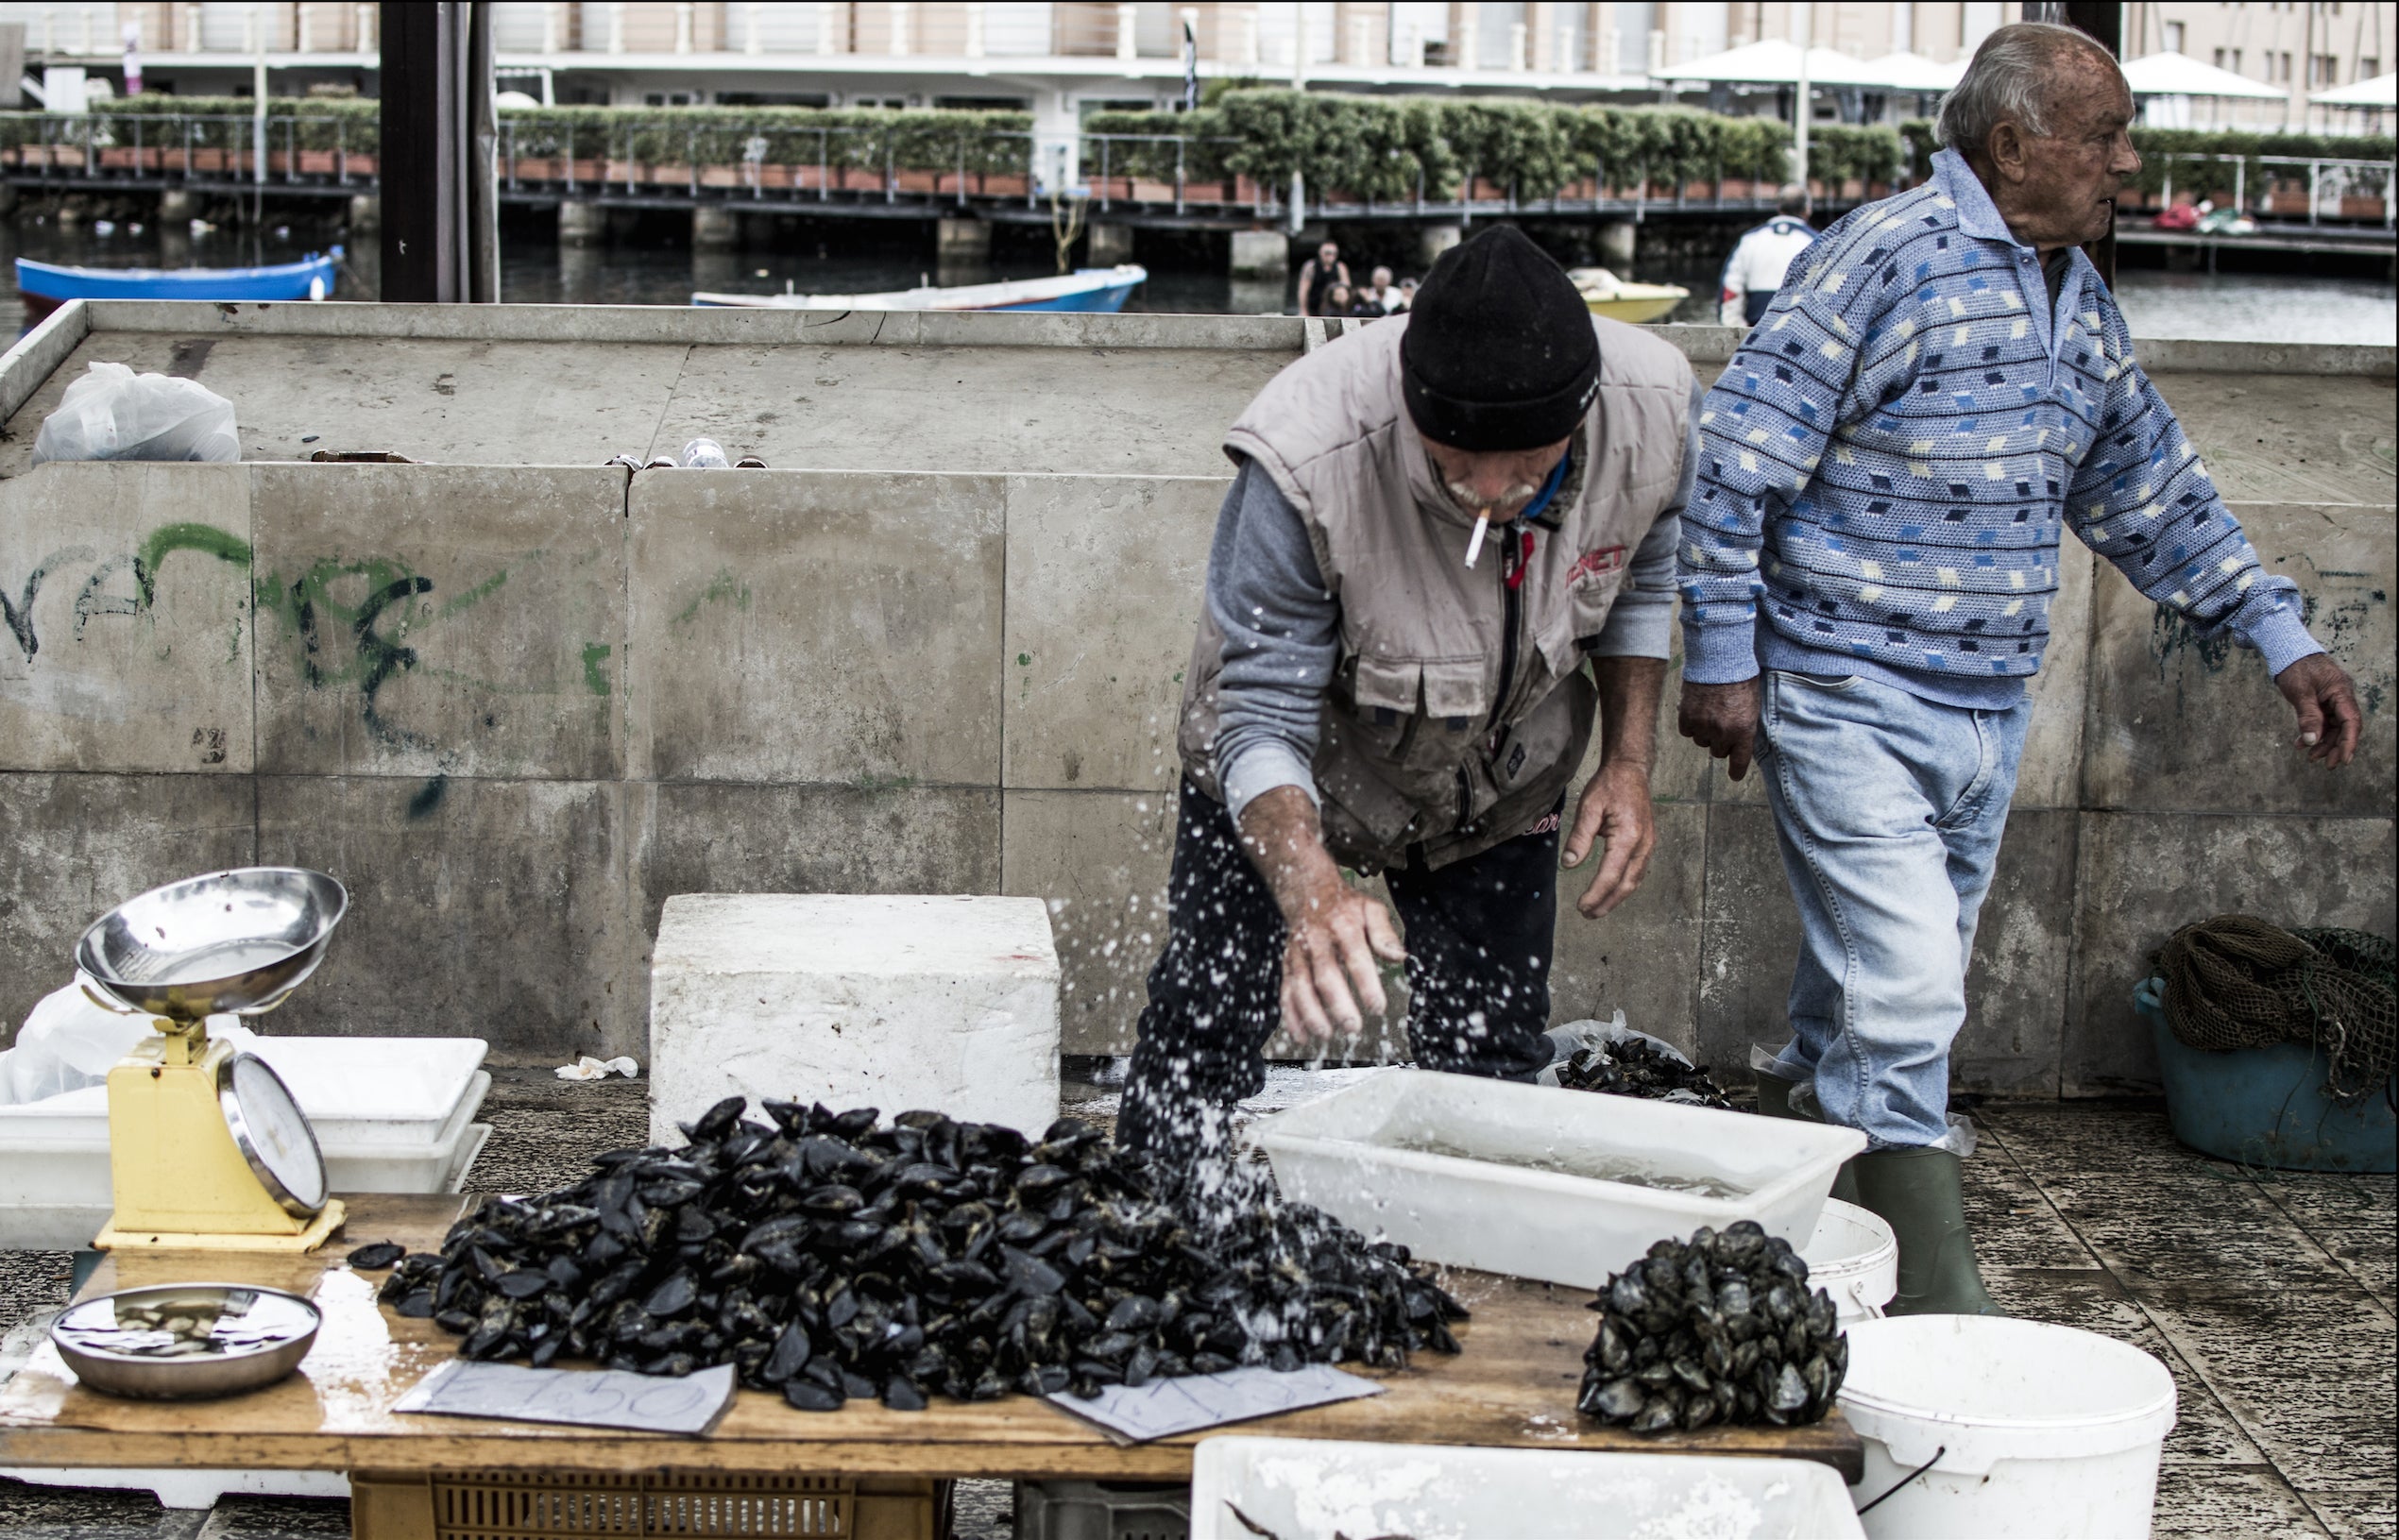 Mussels at the fish market